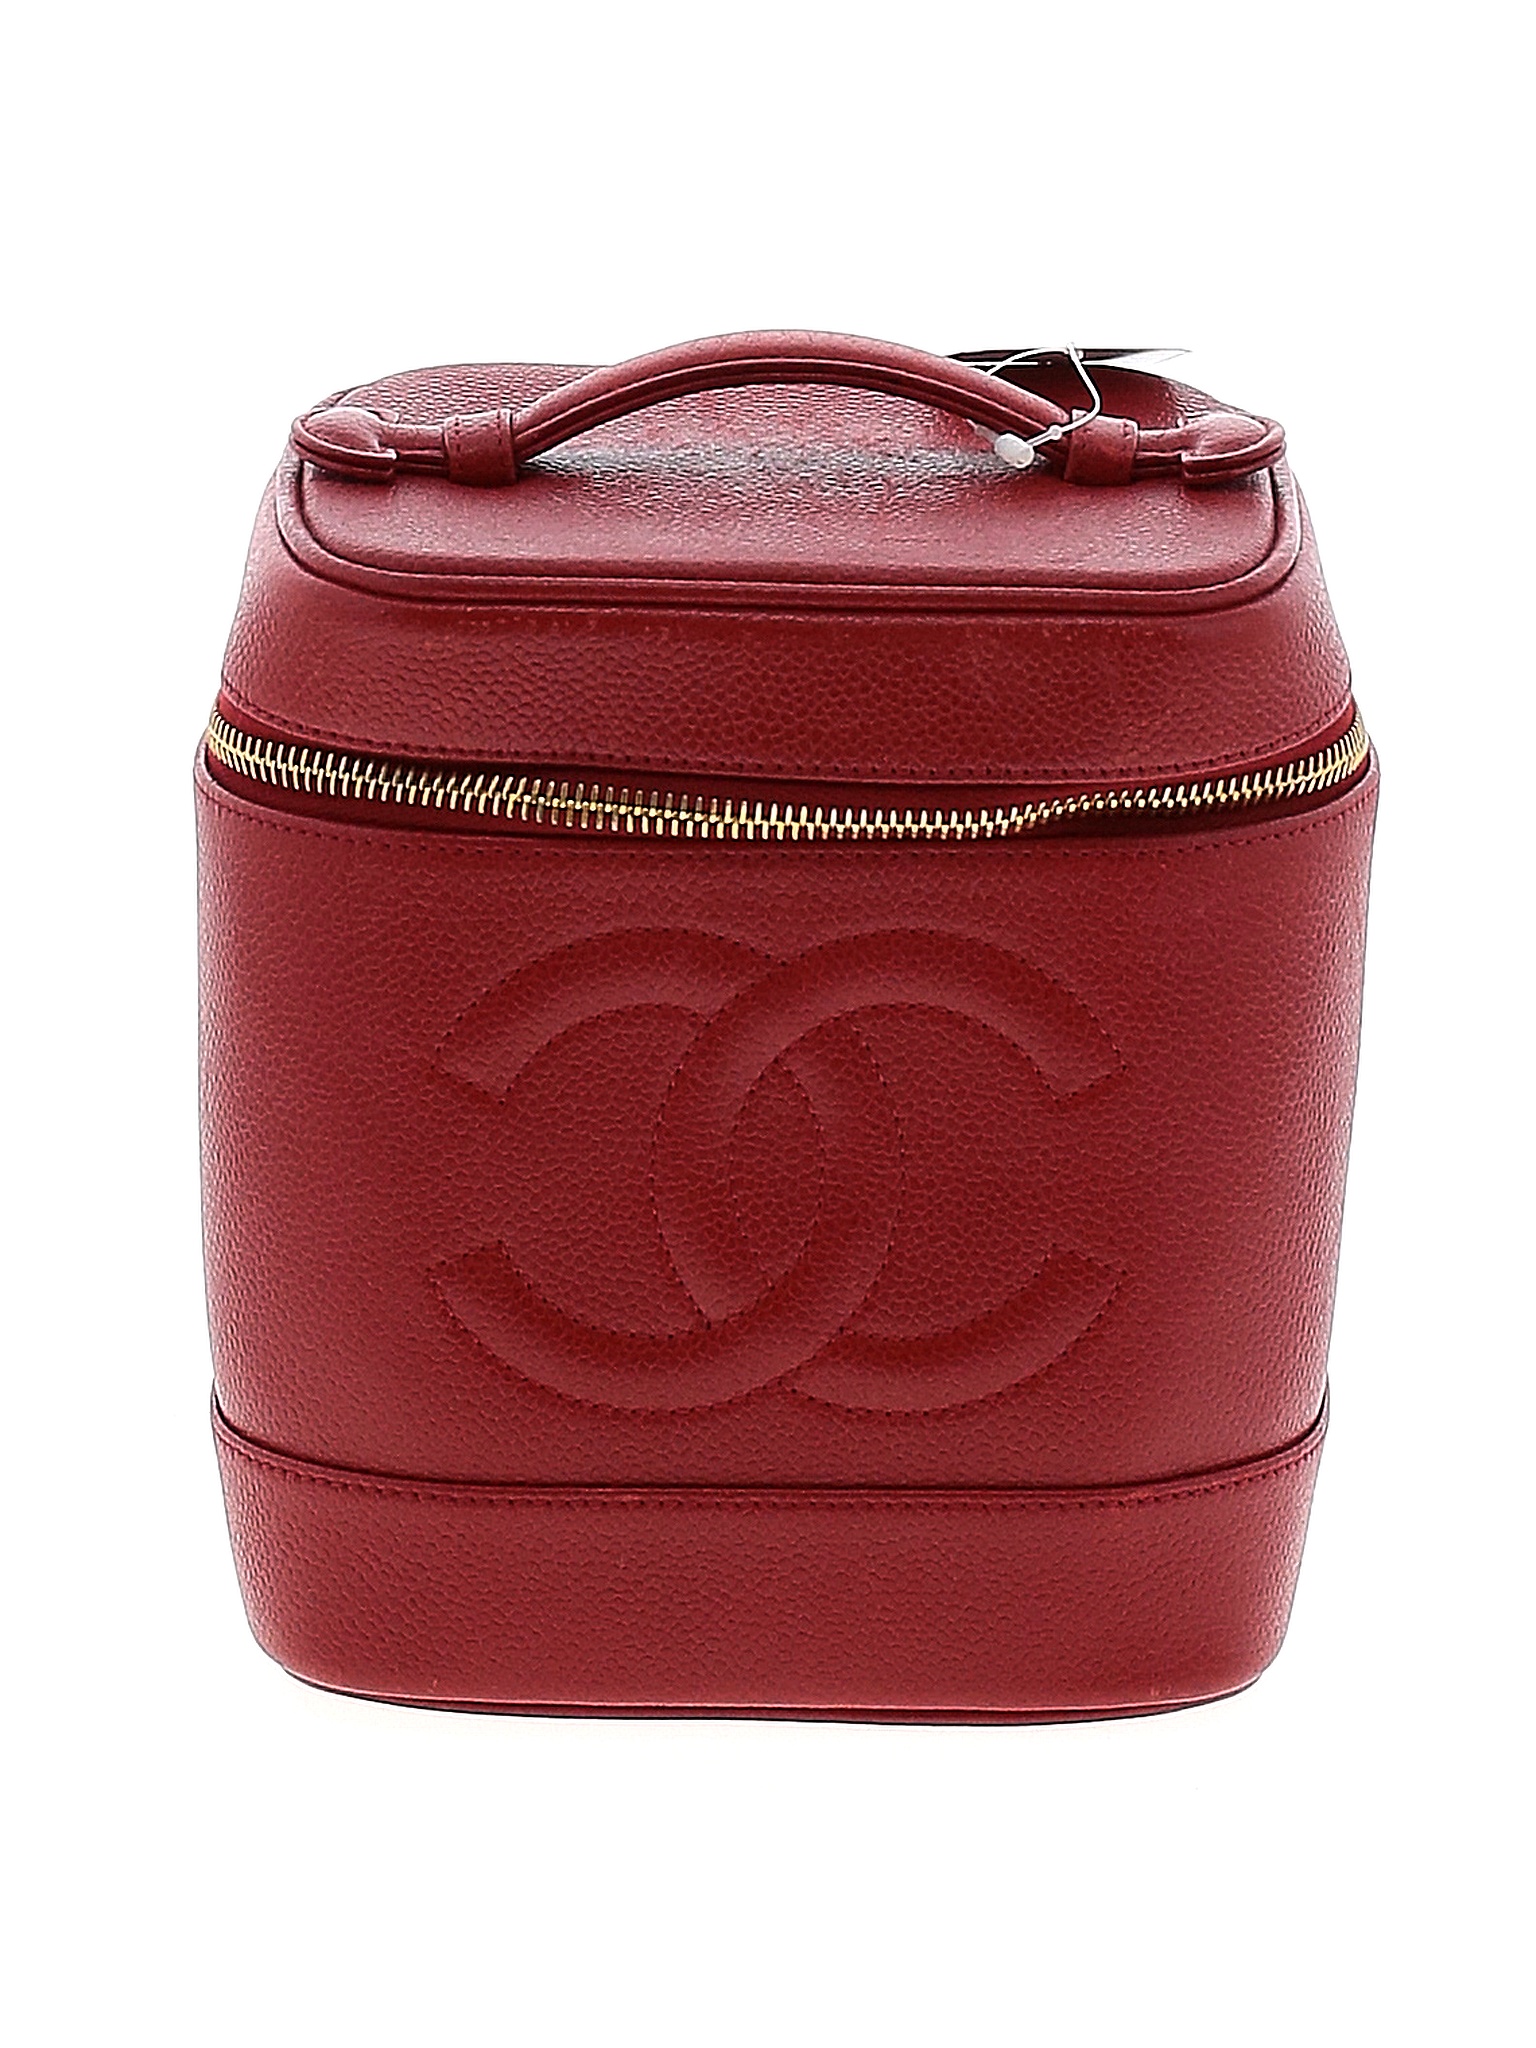 Chanel 100% Leather Red Makeup Bag One Size - 22% off